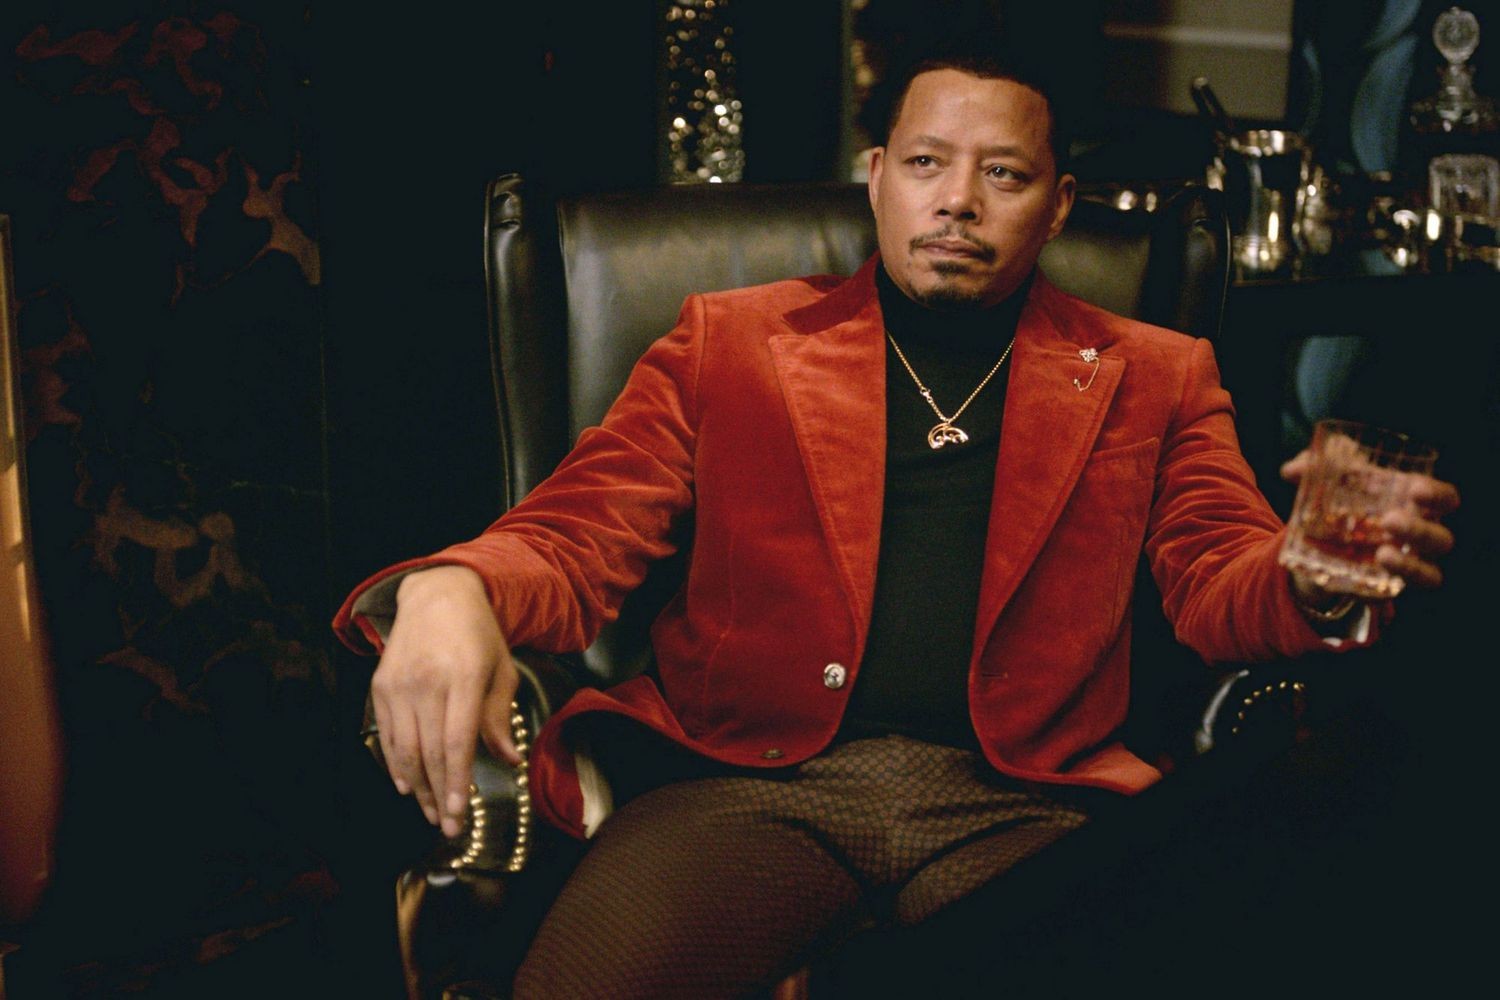 Terrence Howard as Lucious Lyon in a still from Empire